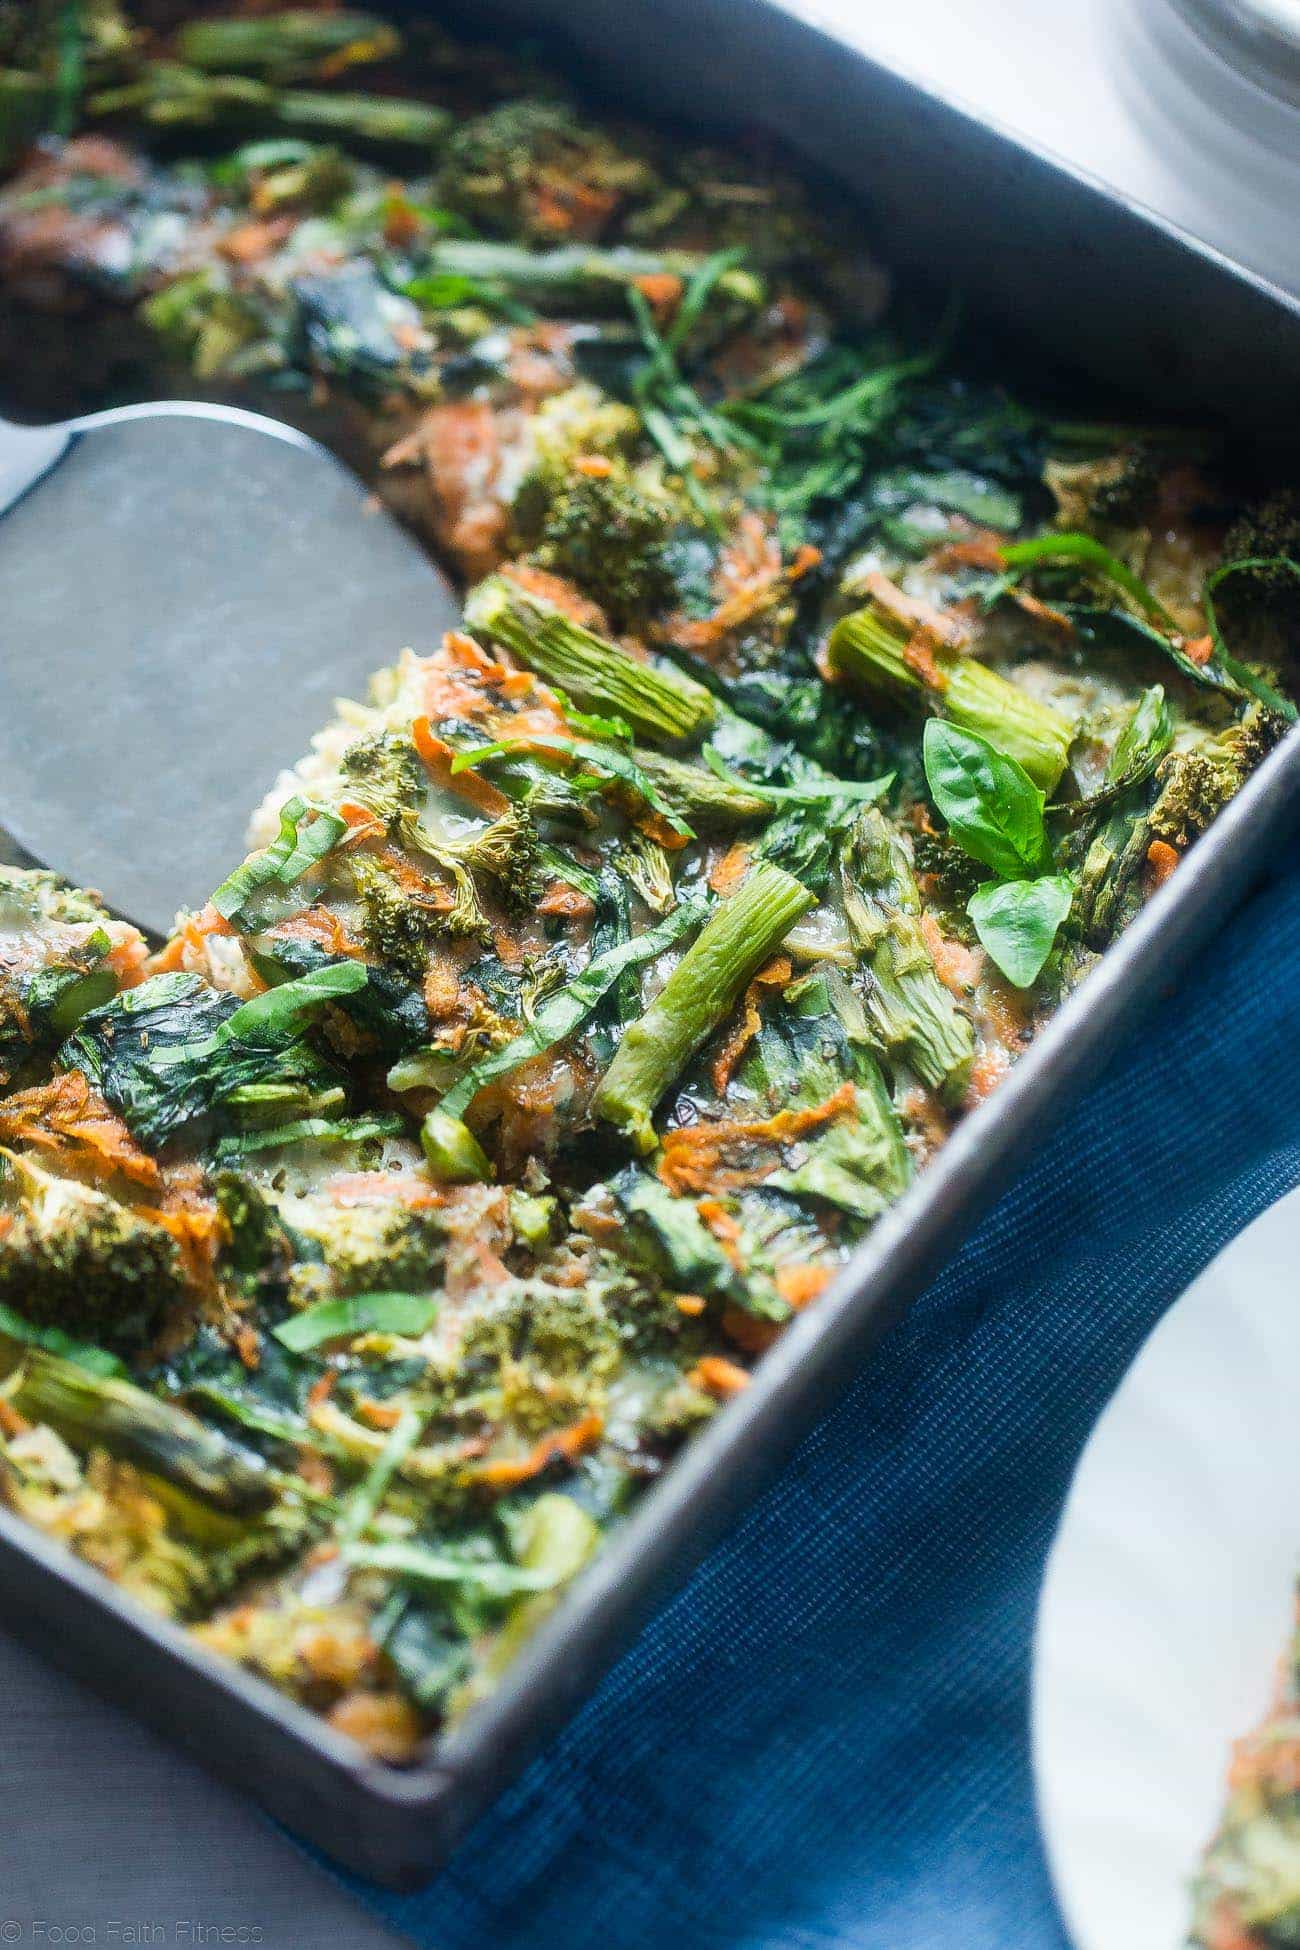 Gluten Free Spring Veggie Sausage Breakfast Casserole - This easy, overnight gluten free breakfast casserole is loaded with seasonal veggies and is only 175 calories! Perfect for spring brunches! | Foodfaithfitness.com | @FoodFaithFit